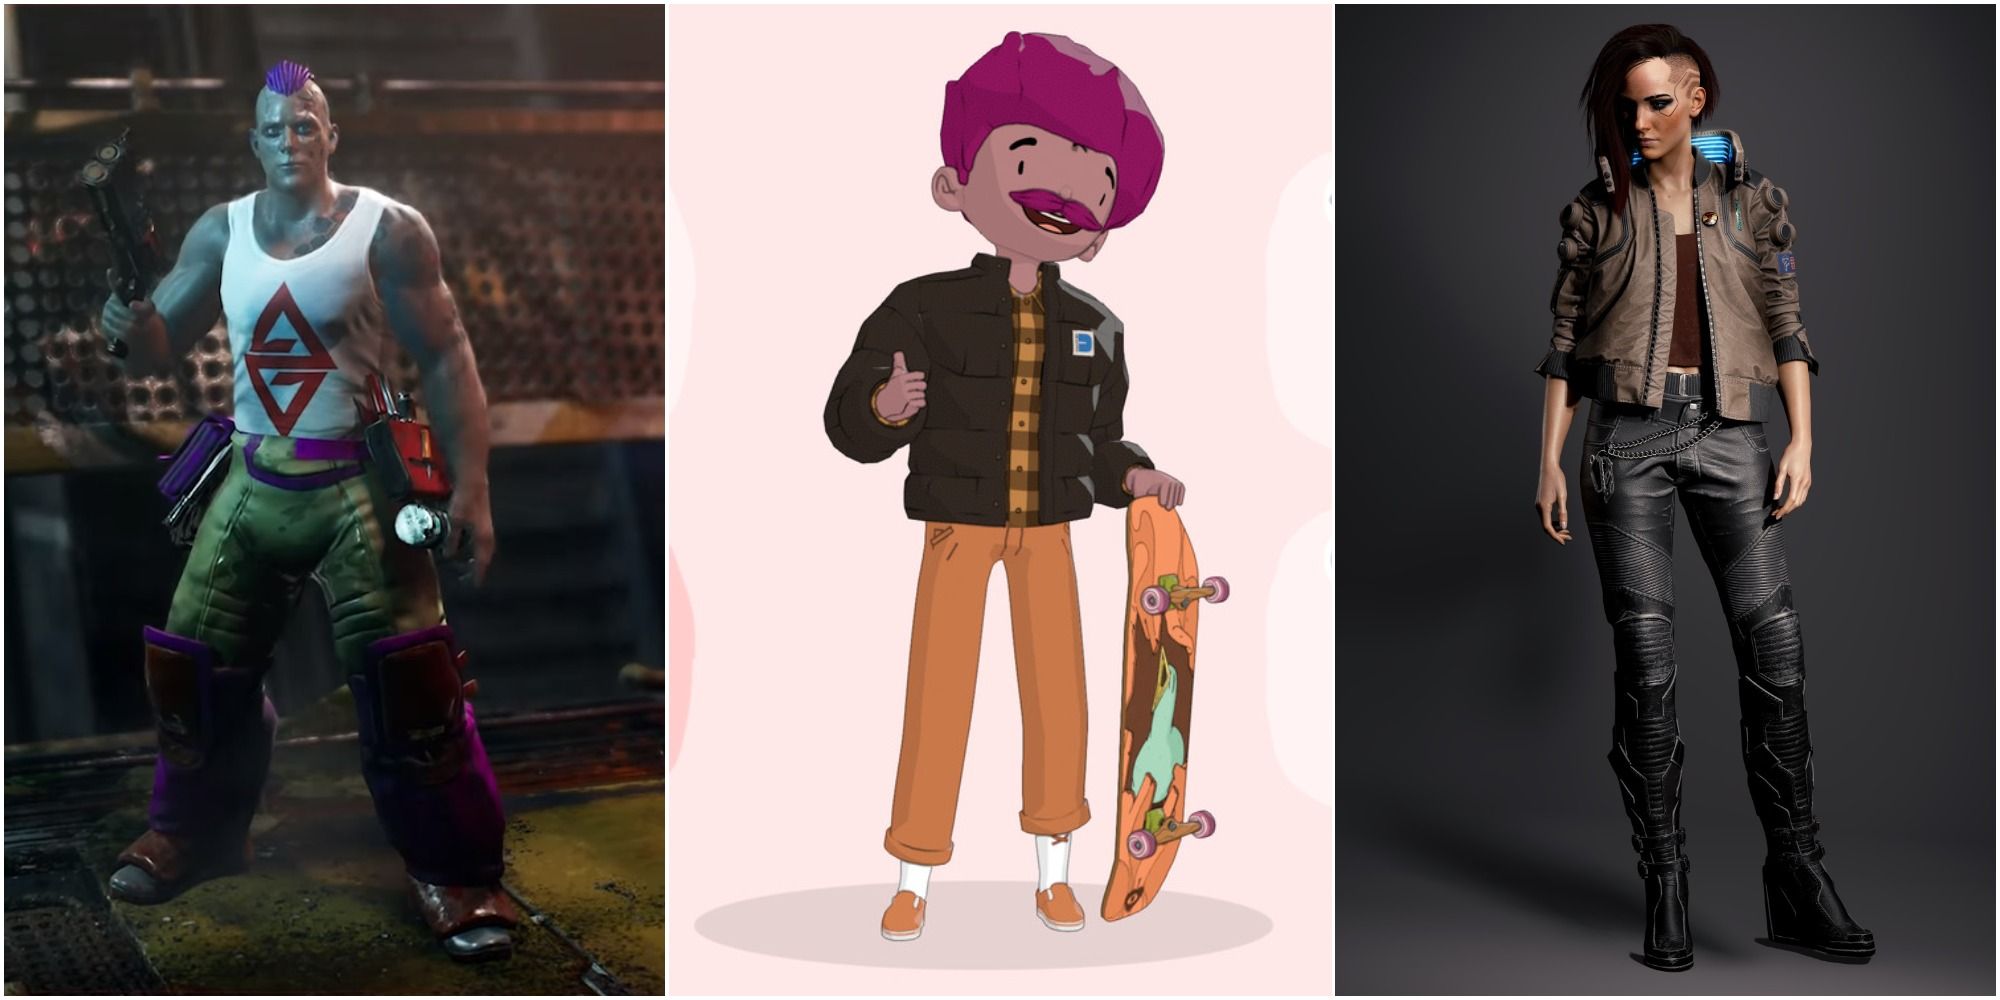 A collage showing character created in The Ascent, OlliOlli World and Cyberpunk 2077